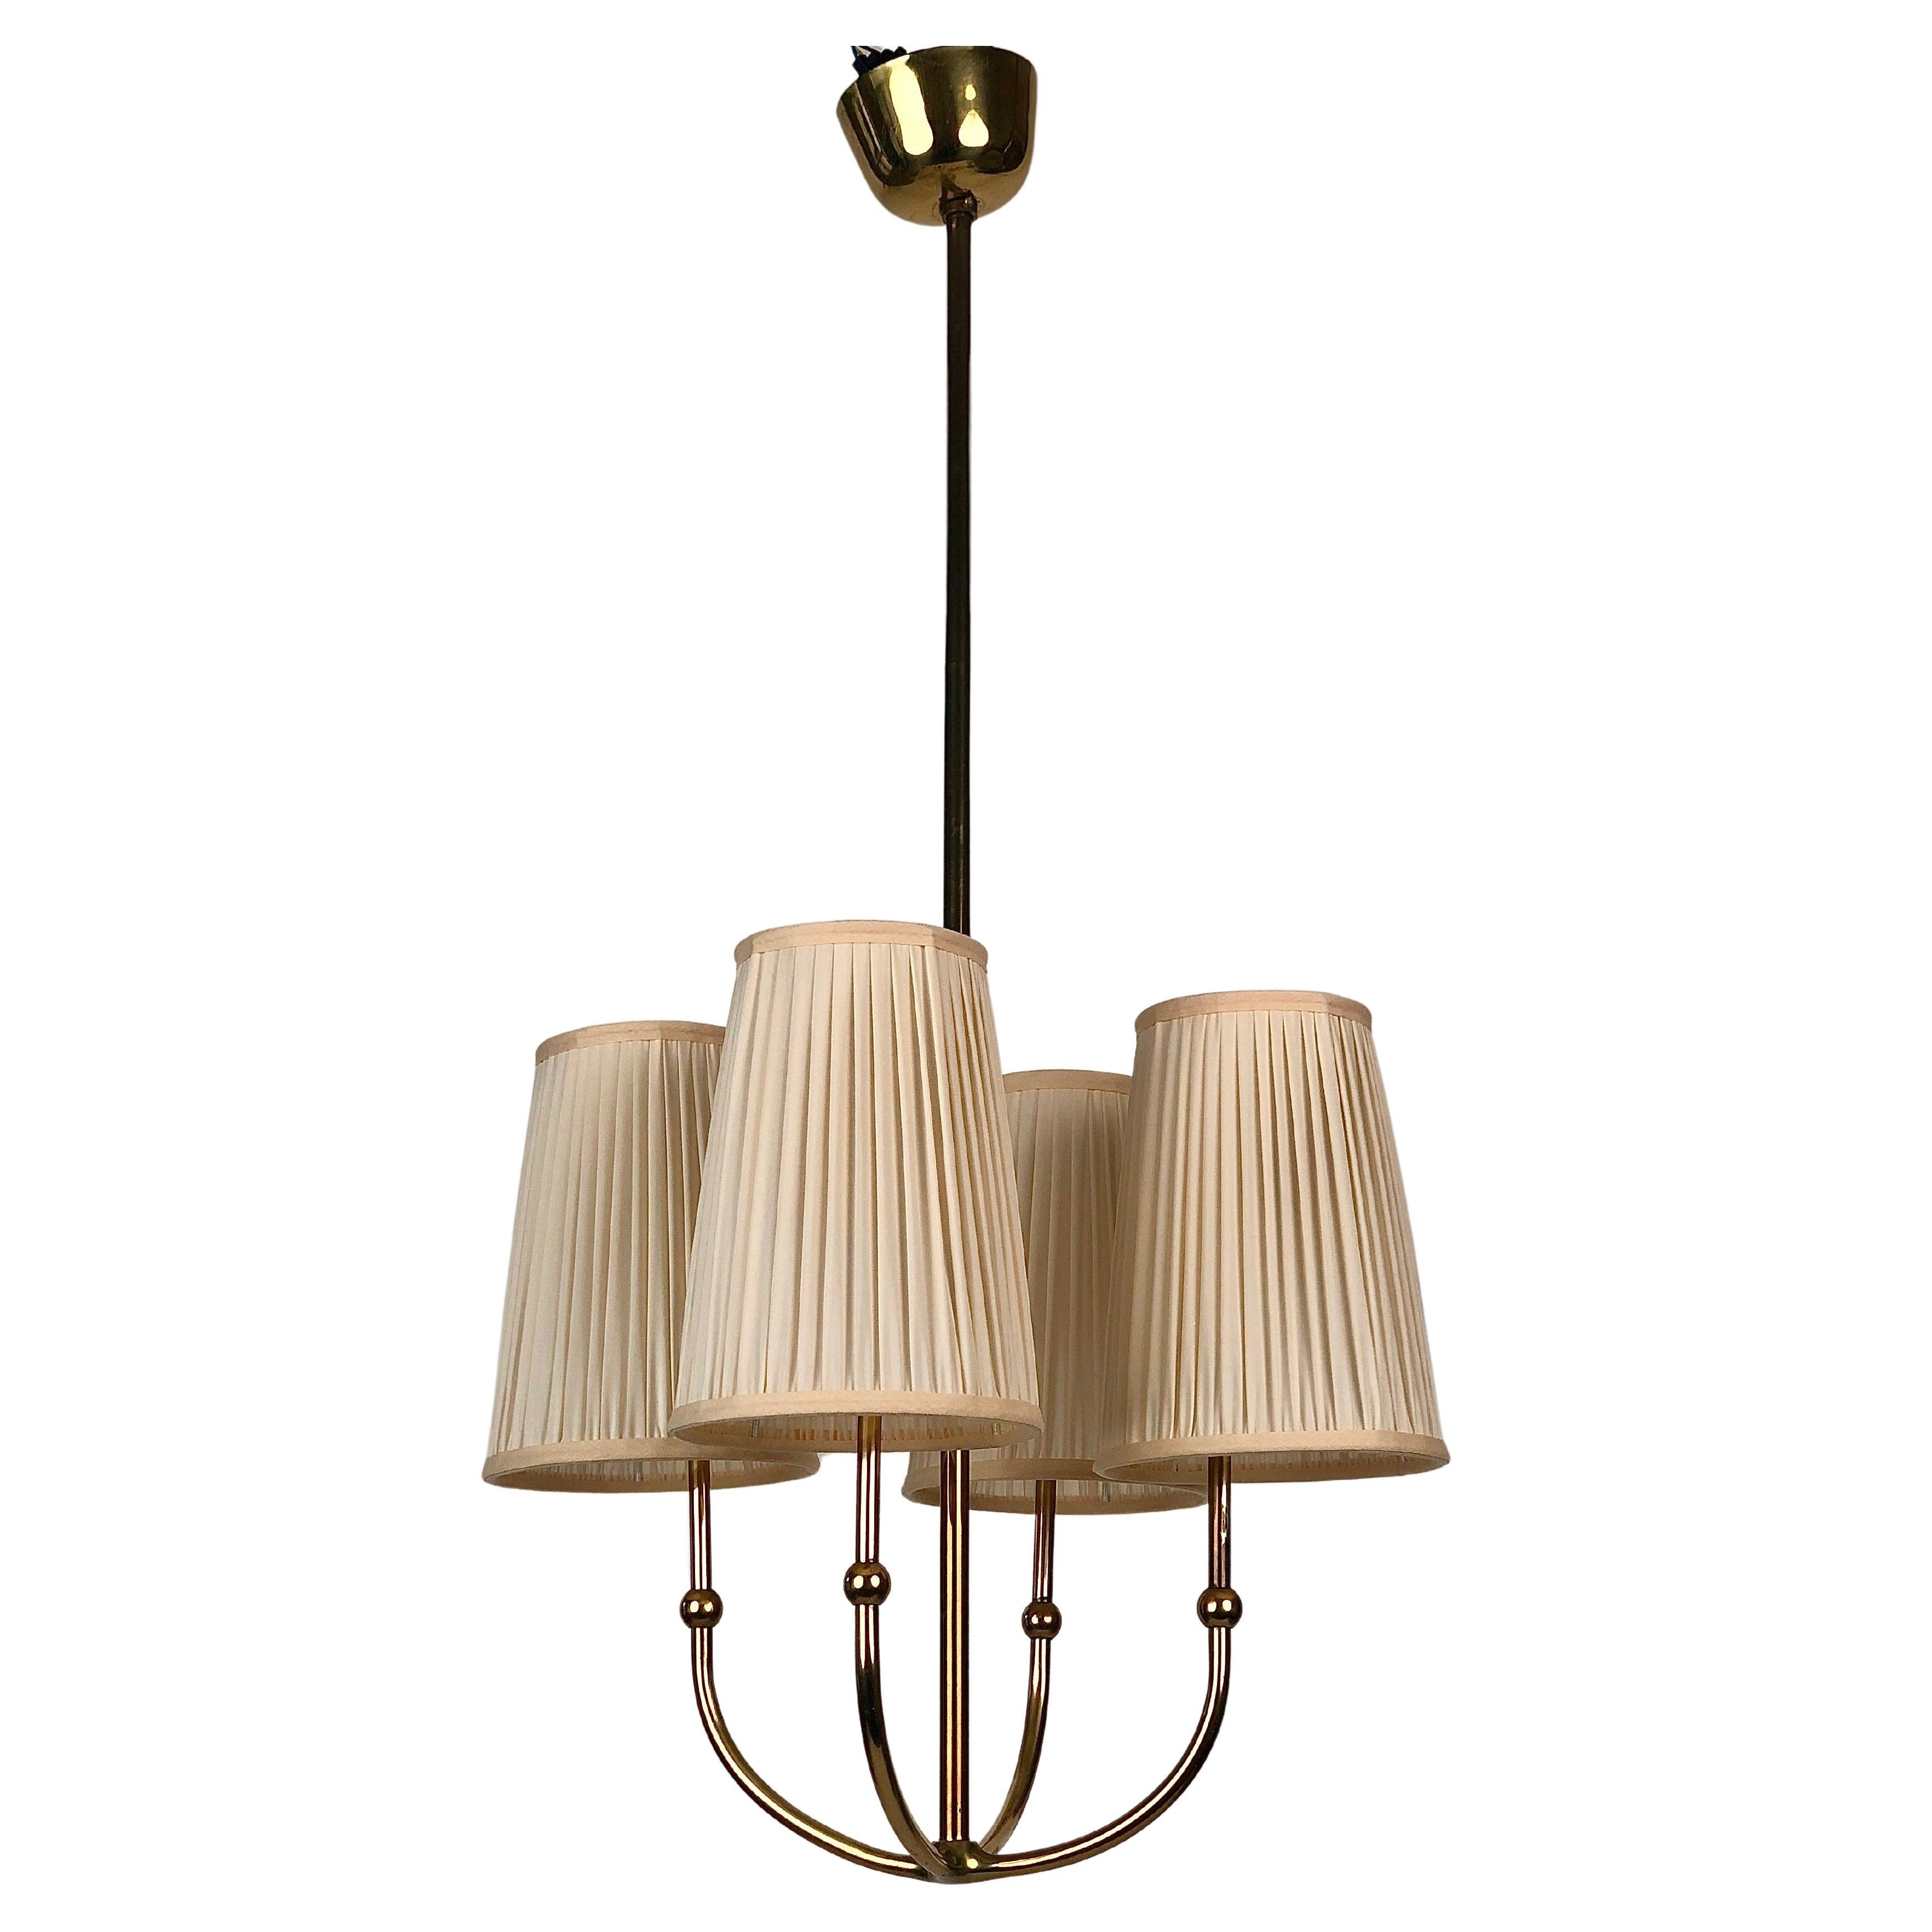 Four Arm Chandelier in Brass with Silk Shades , 1930's, Austria For Sale